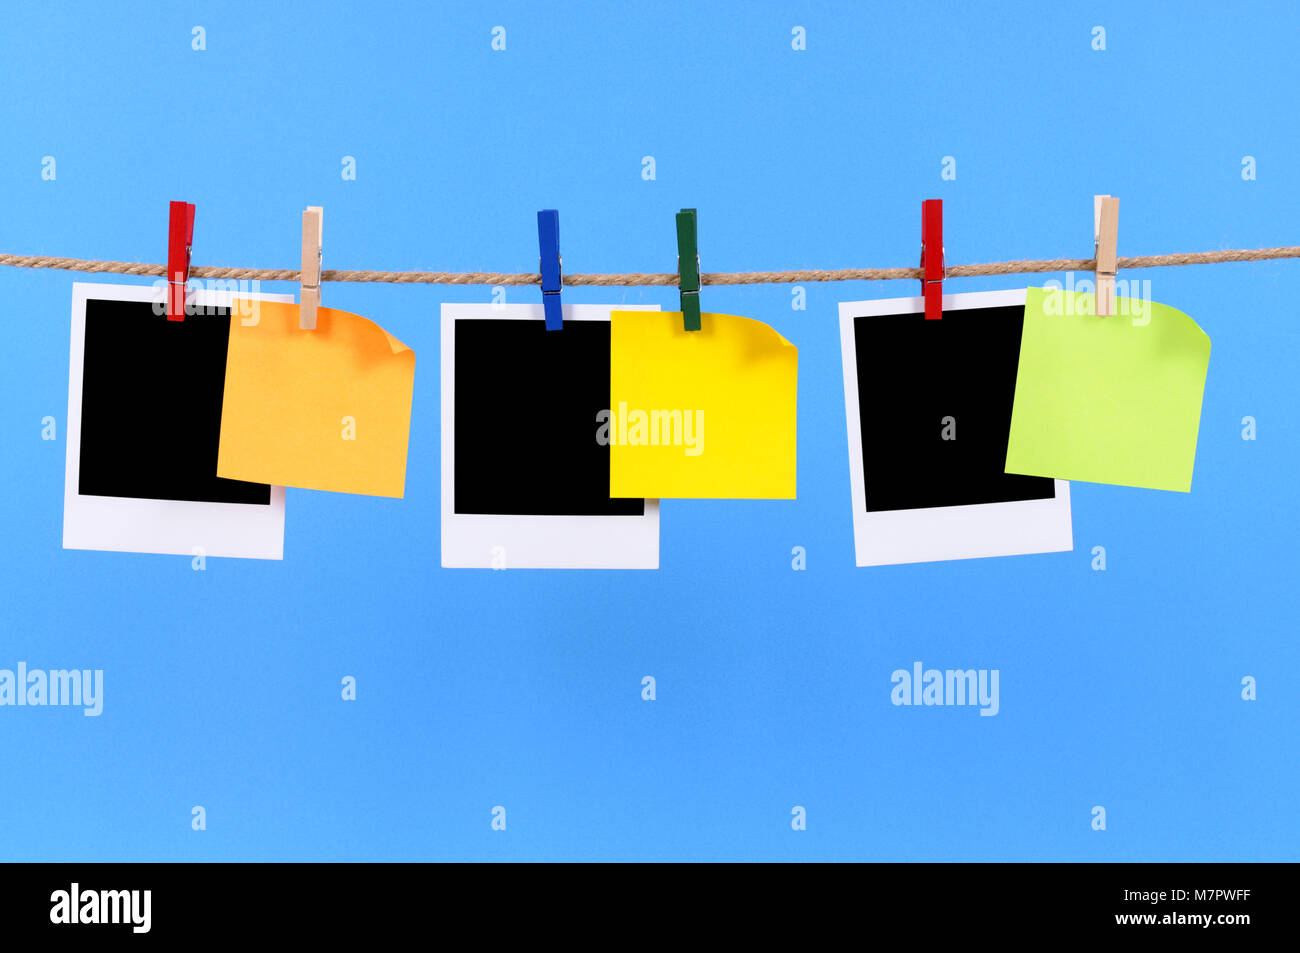 Blank instant camera photo prints and office sticky notes hanging on a rope or string isolated against a blue background.  Space for copy. Stock Photo